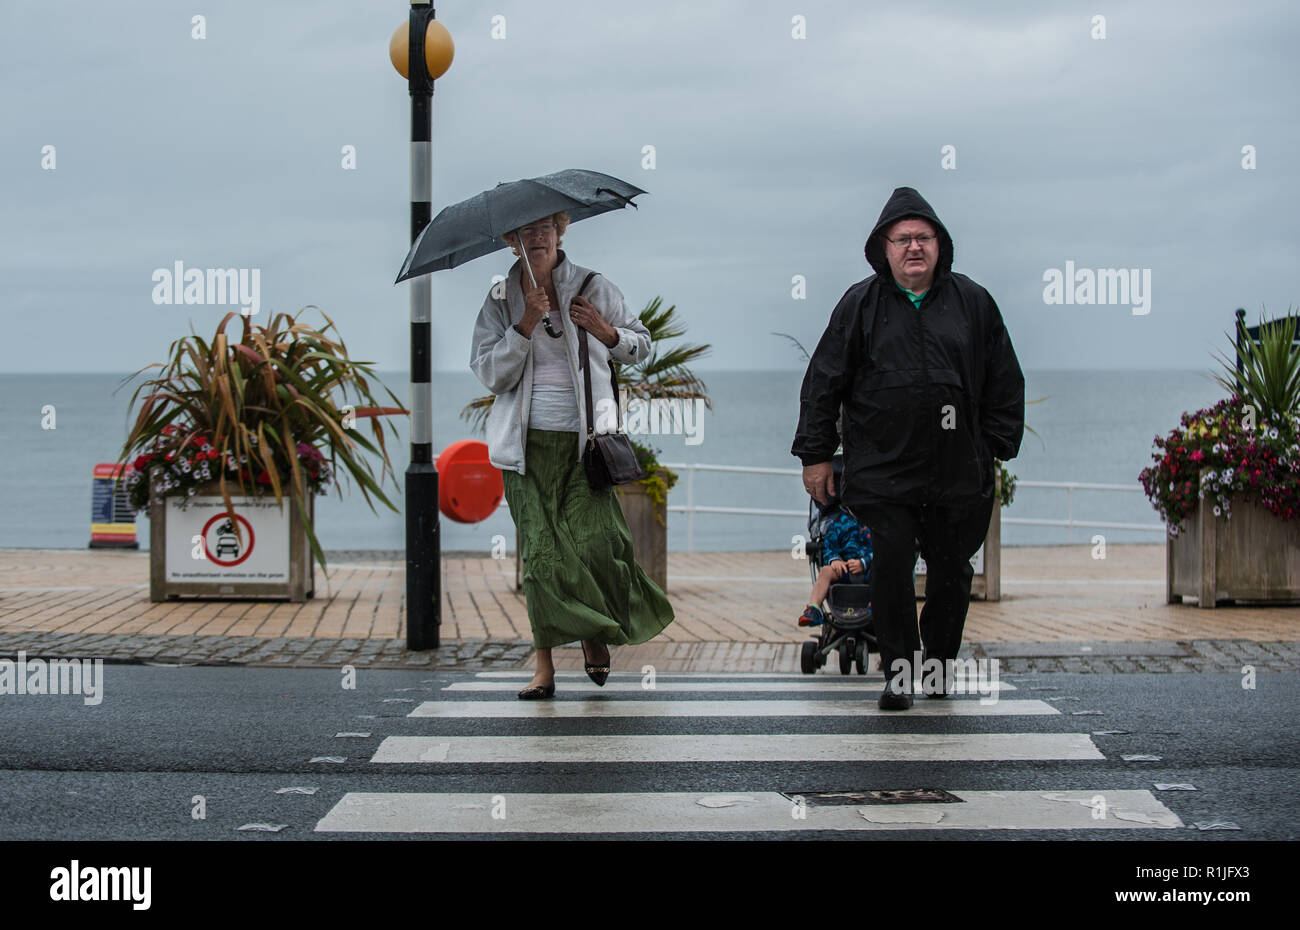 People going about their daily life in the rain. Stock Photo